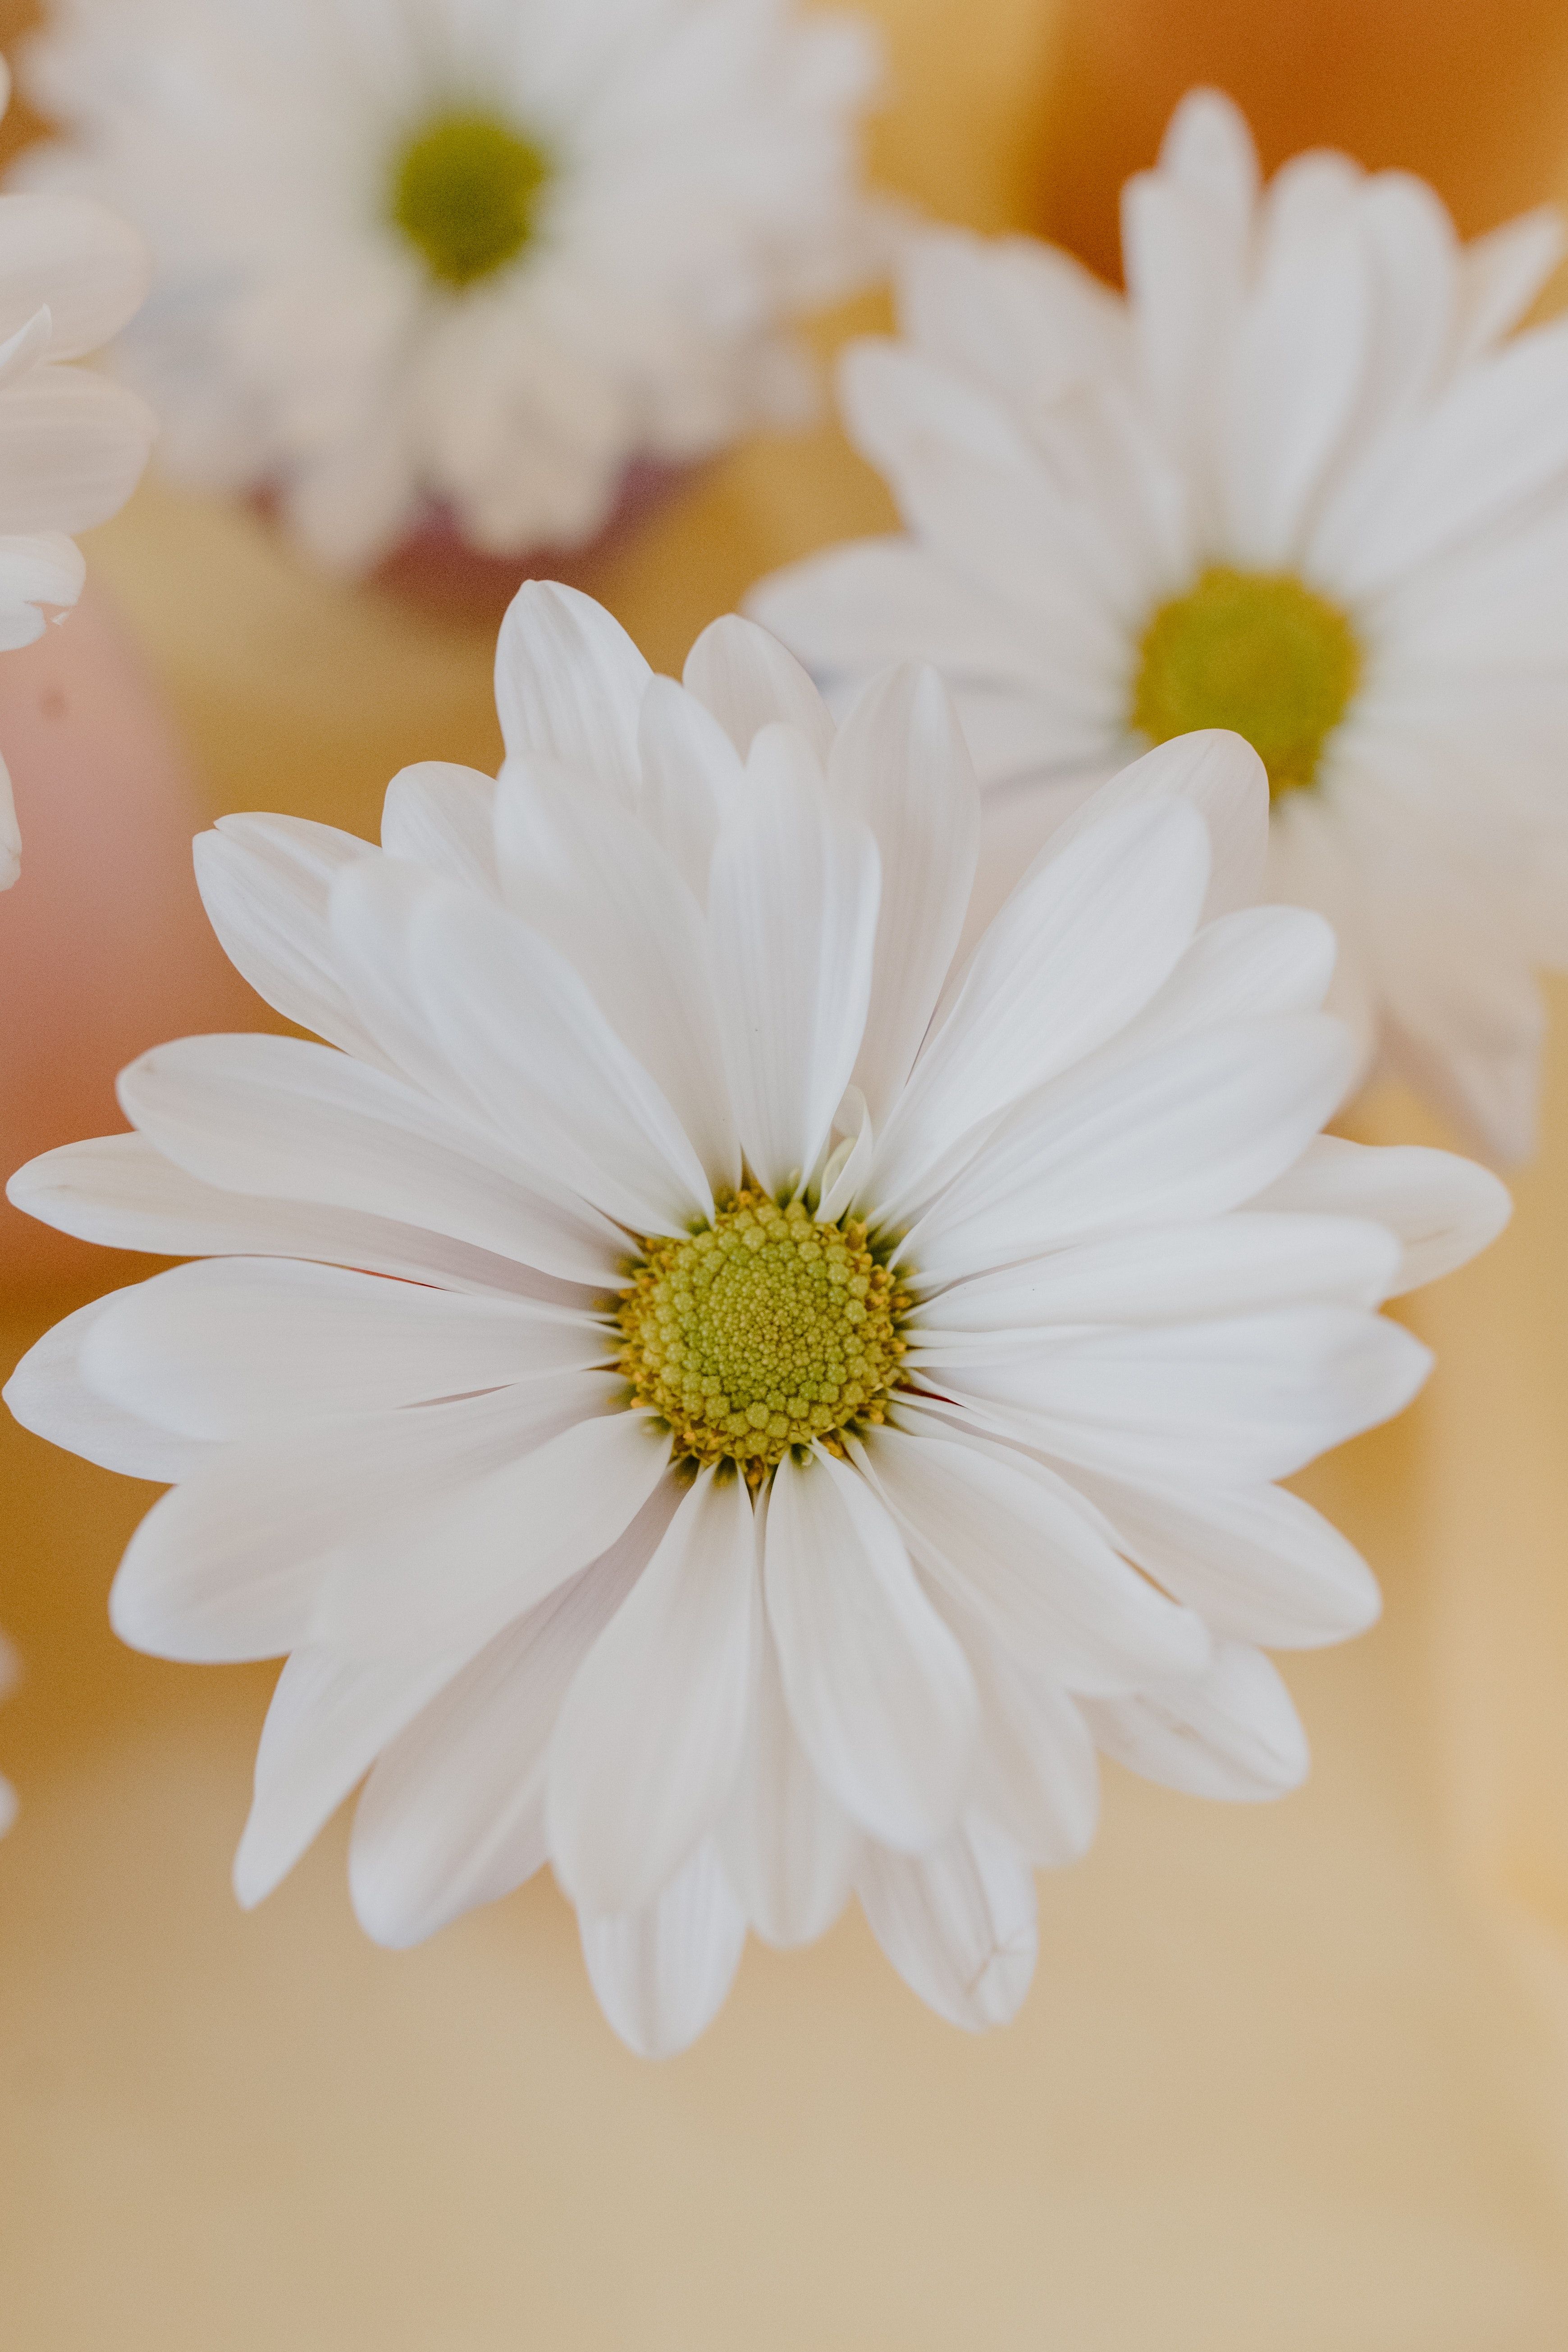 A close up of some flowers on the table - Daisy